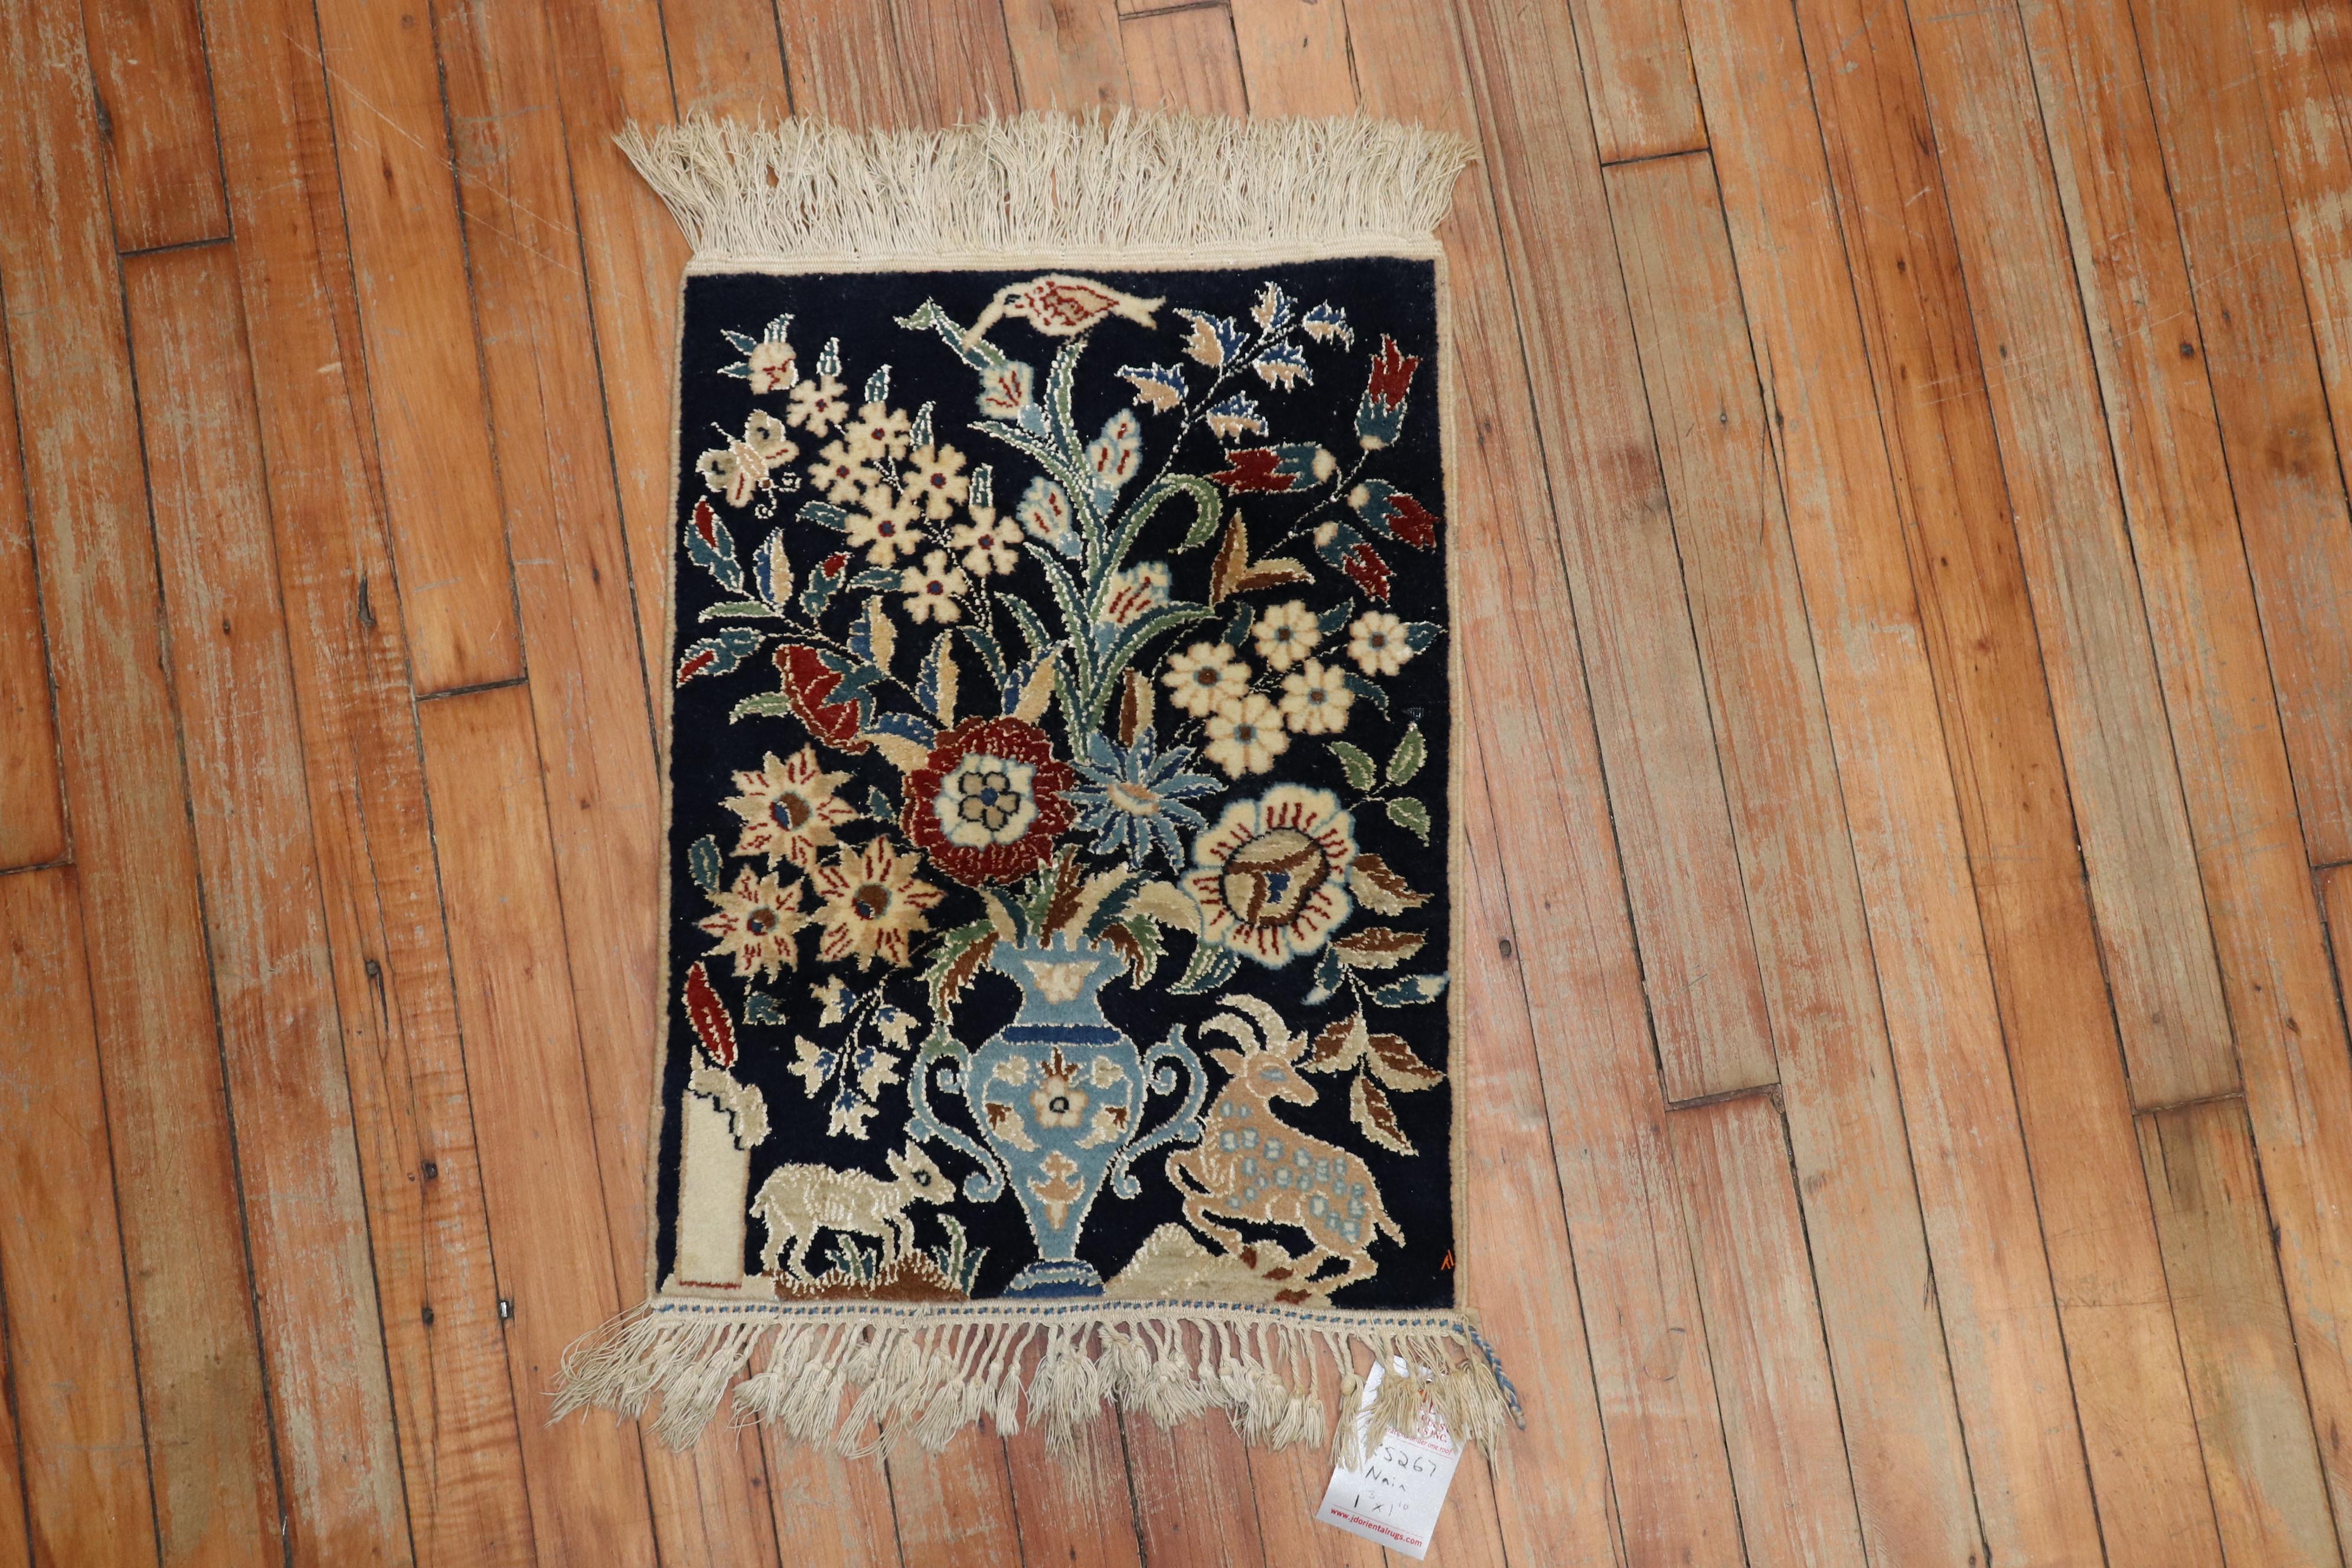 One of a kind mid-20th century highly decorative caliber Pictorial Persian Nain rug with a animal floral motif on a deep blue field.

Measures: 1'3